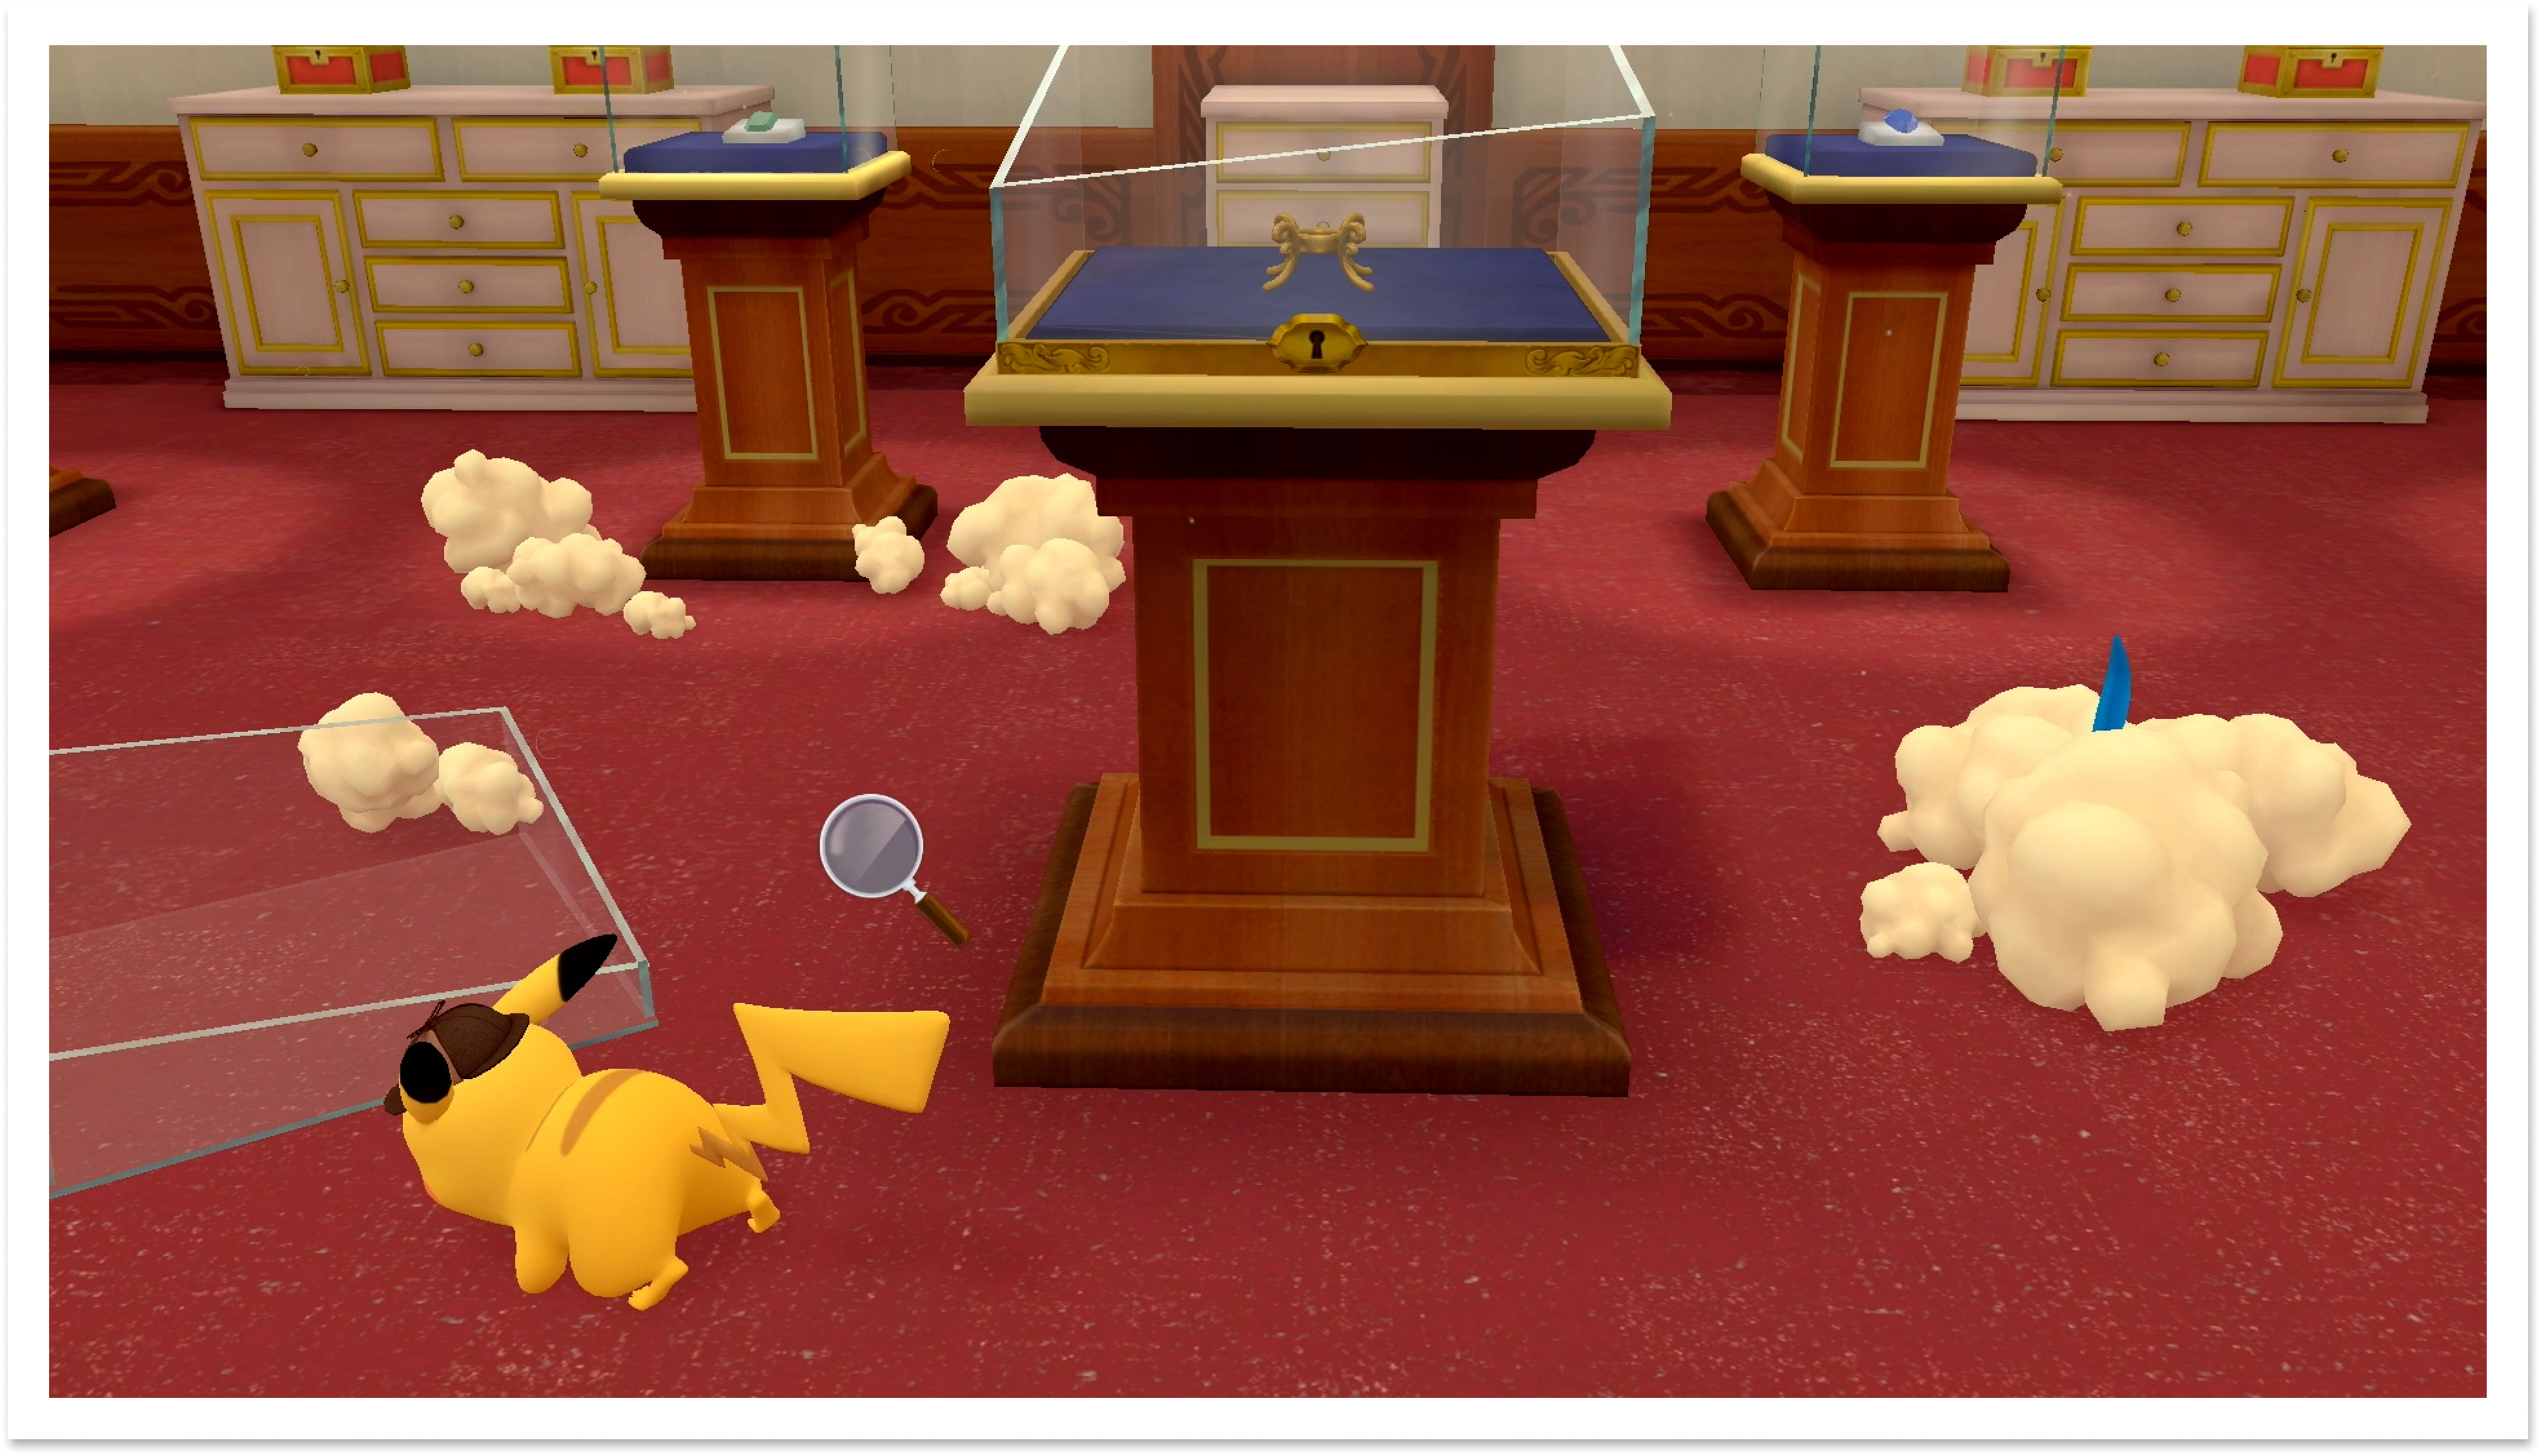 Pikachu searching for clues